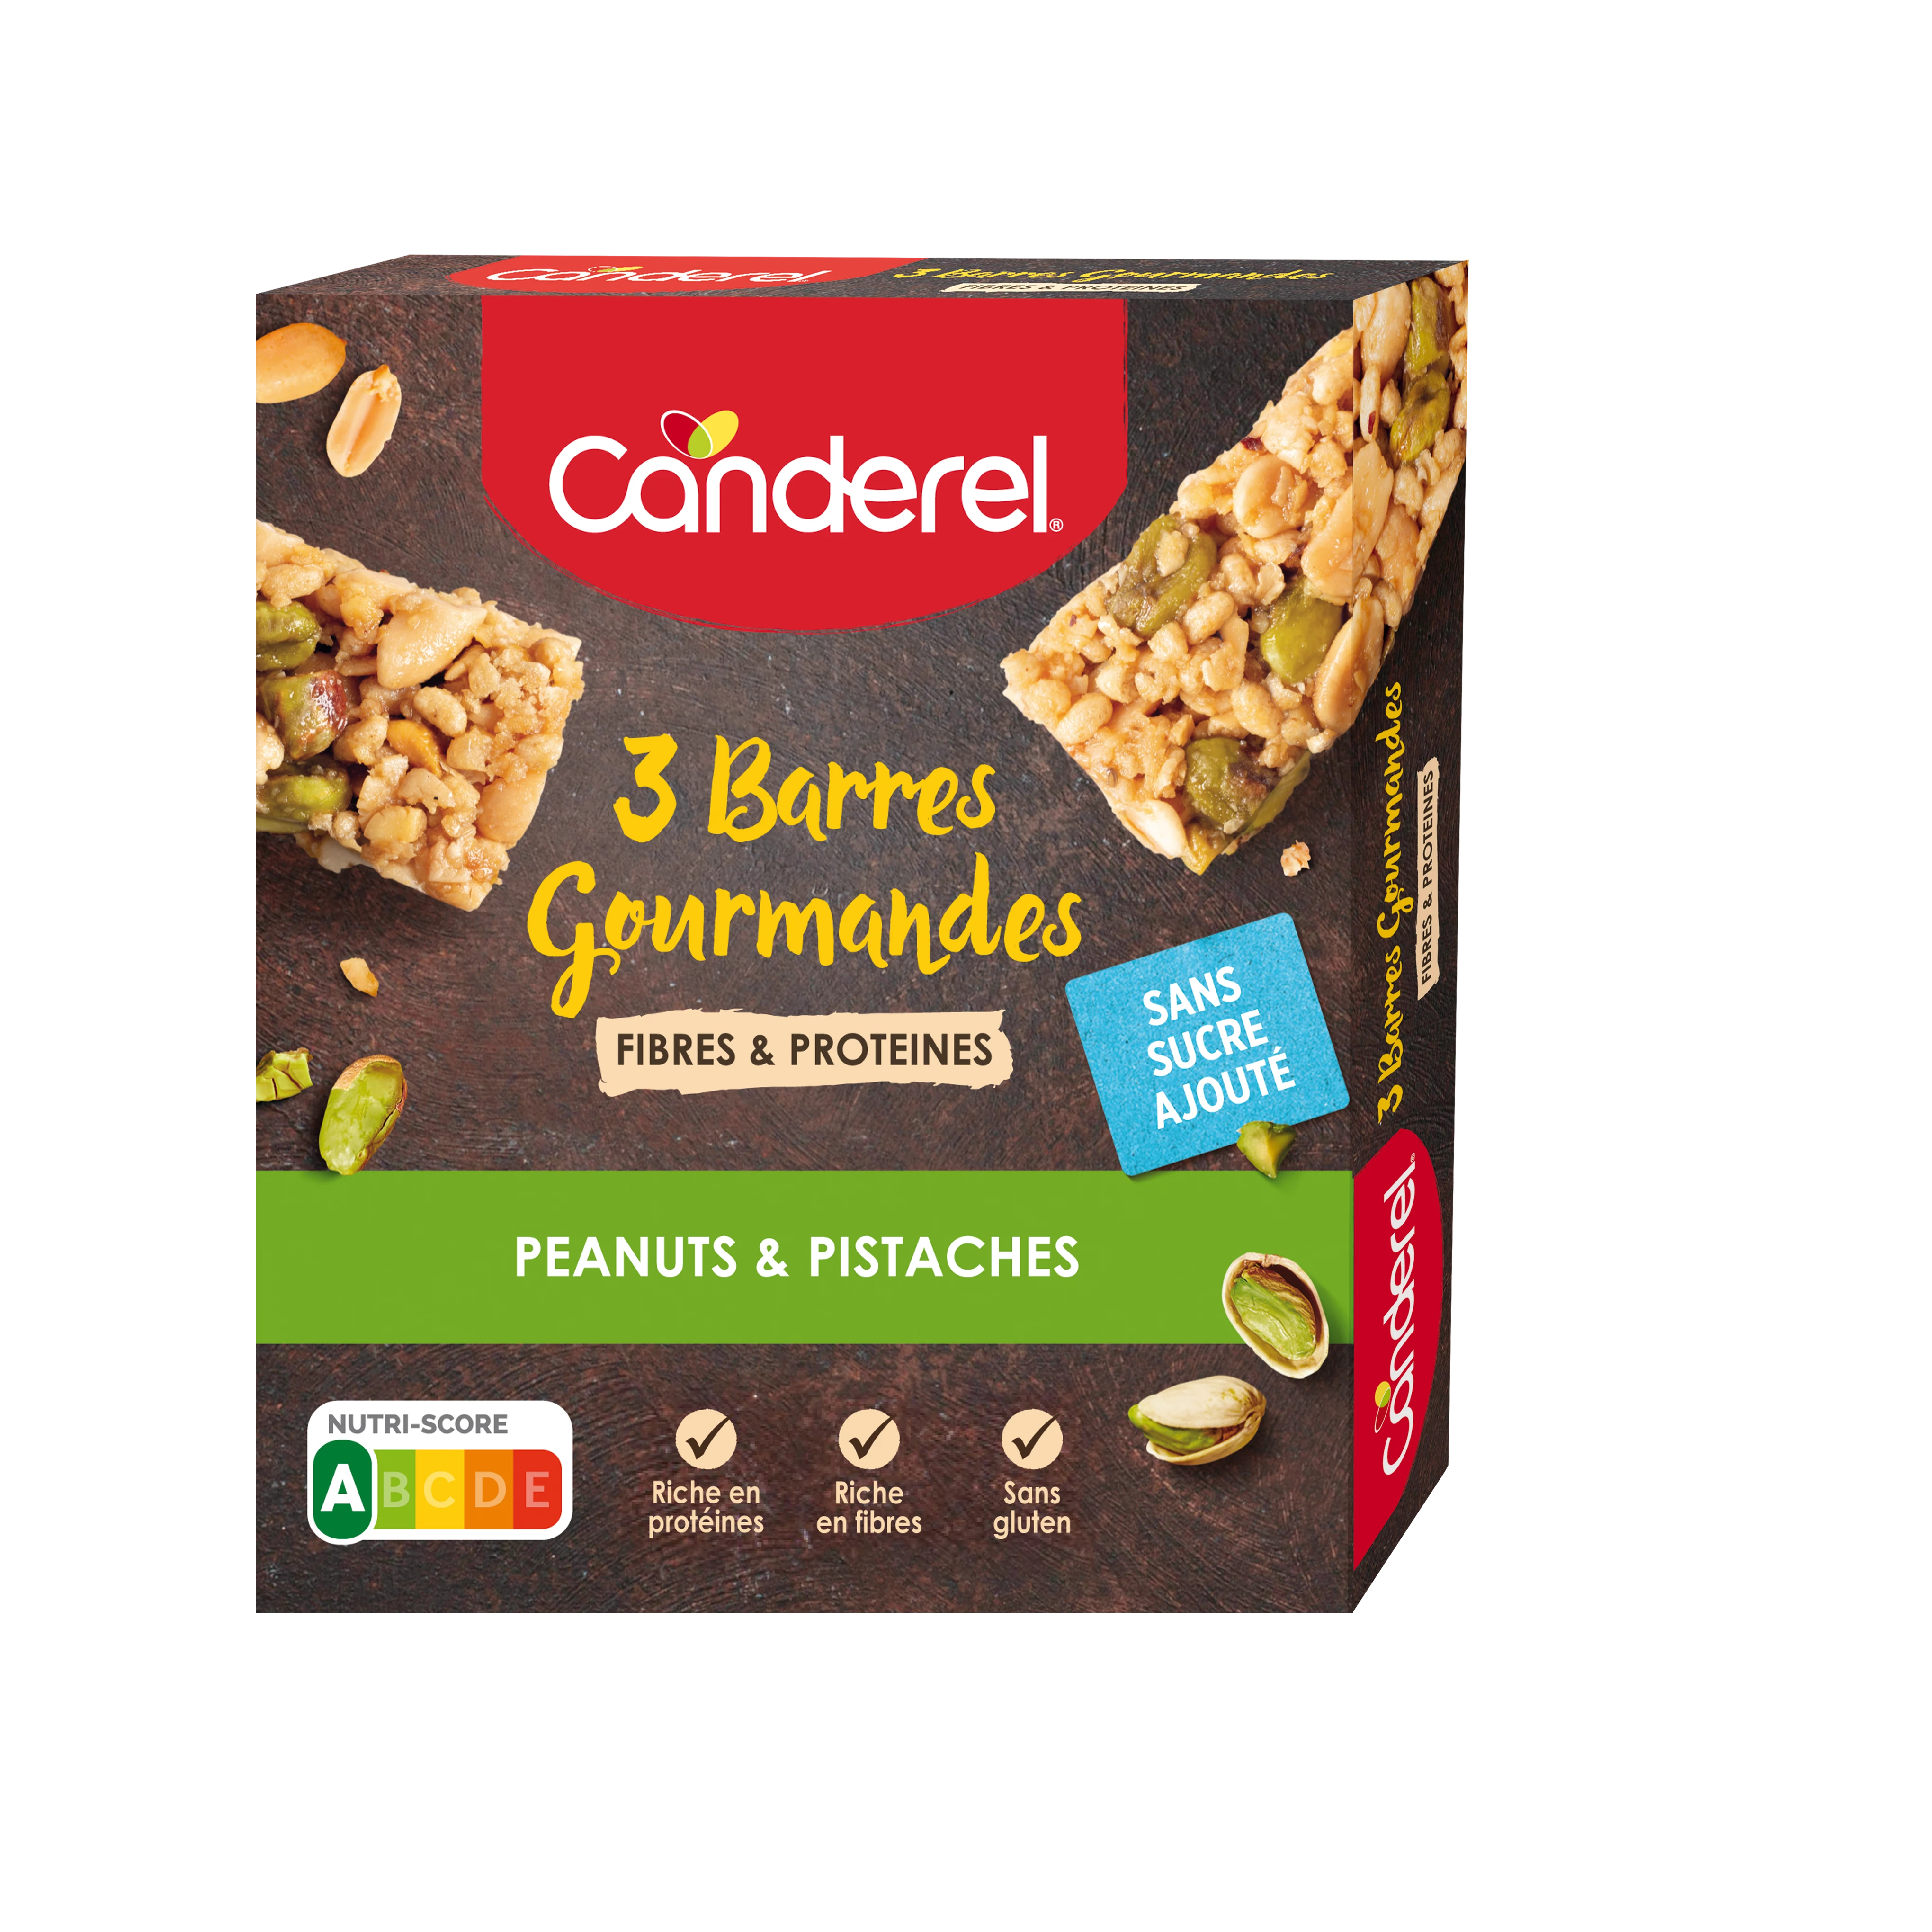 Pistachio and peanut cereal bar - CANDEREL